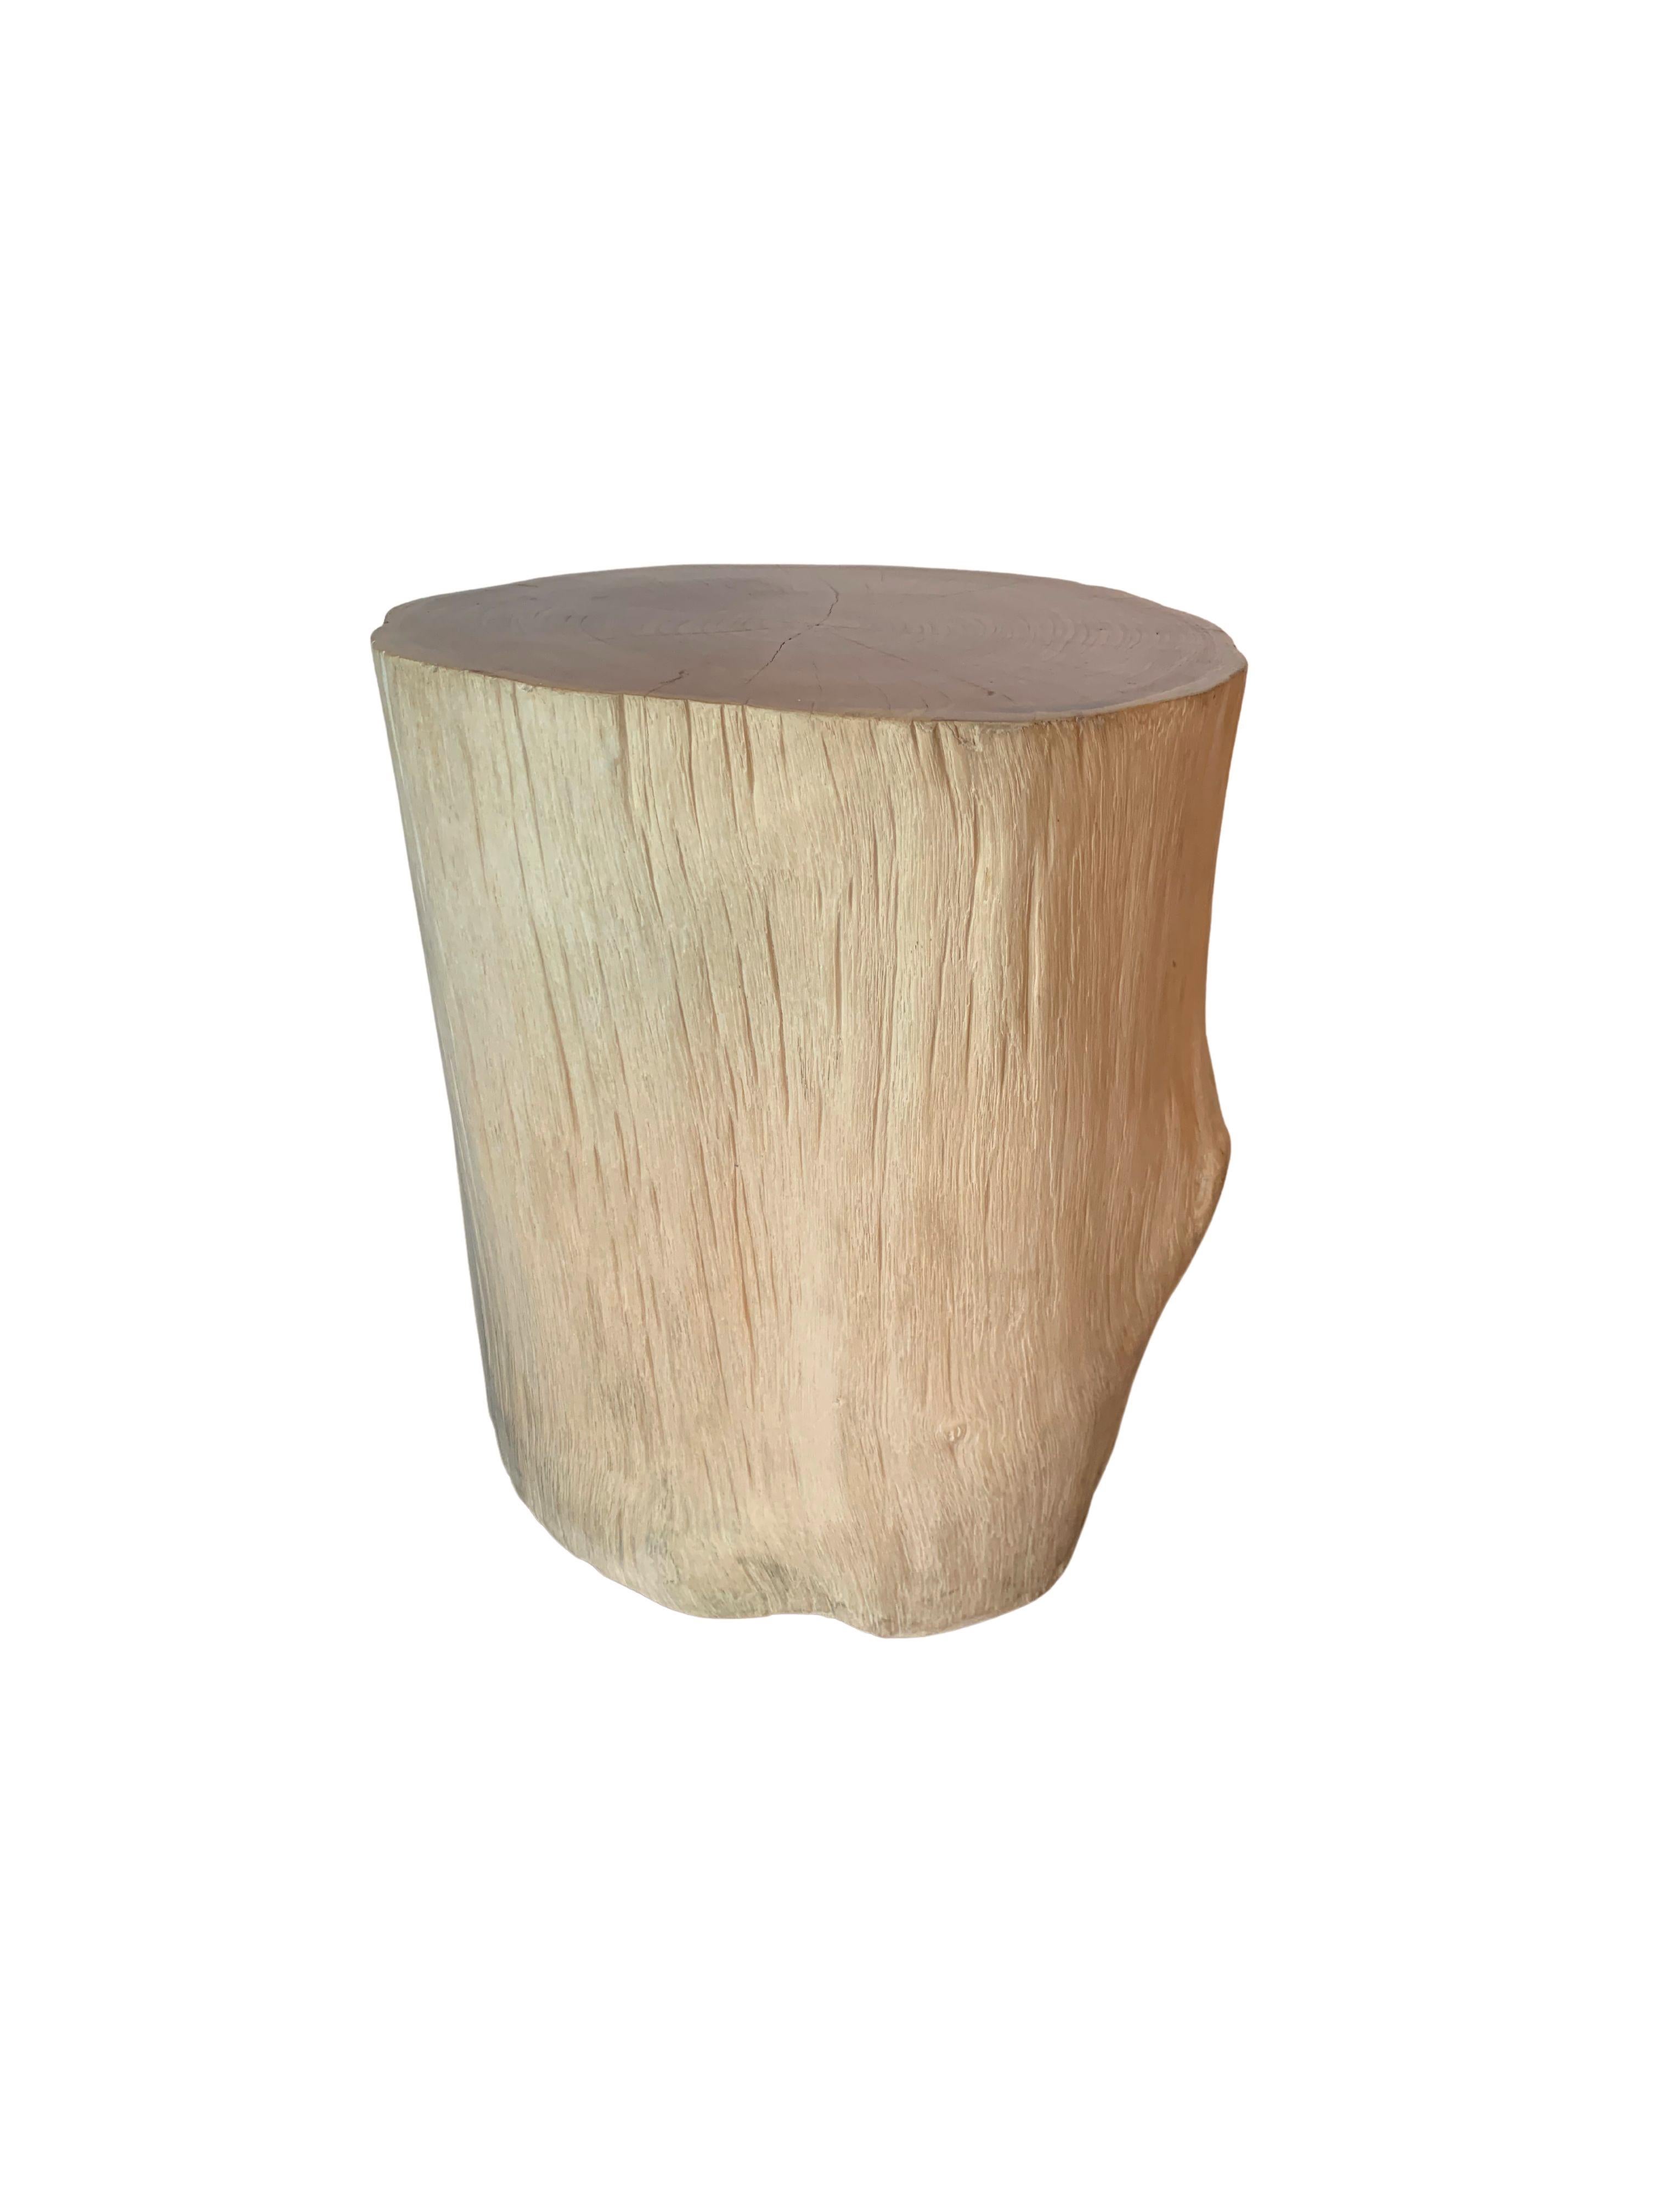 A wonderfully organic round side table. Its neutral pigment and subtle wood texture makes it perfect for any space. This table was crafted from a solid trunk of teak wood. To achieve its pigment the wood was bleached on its sides numerous times and